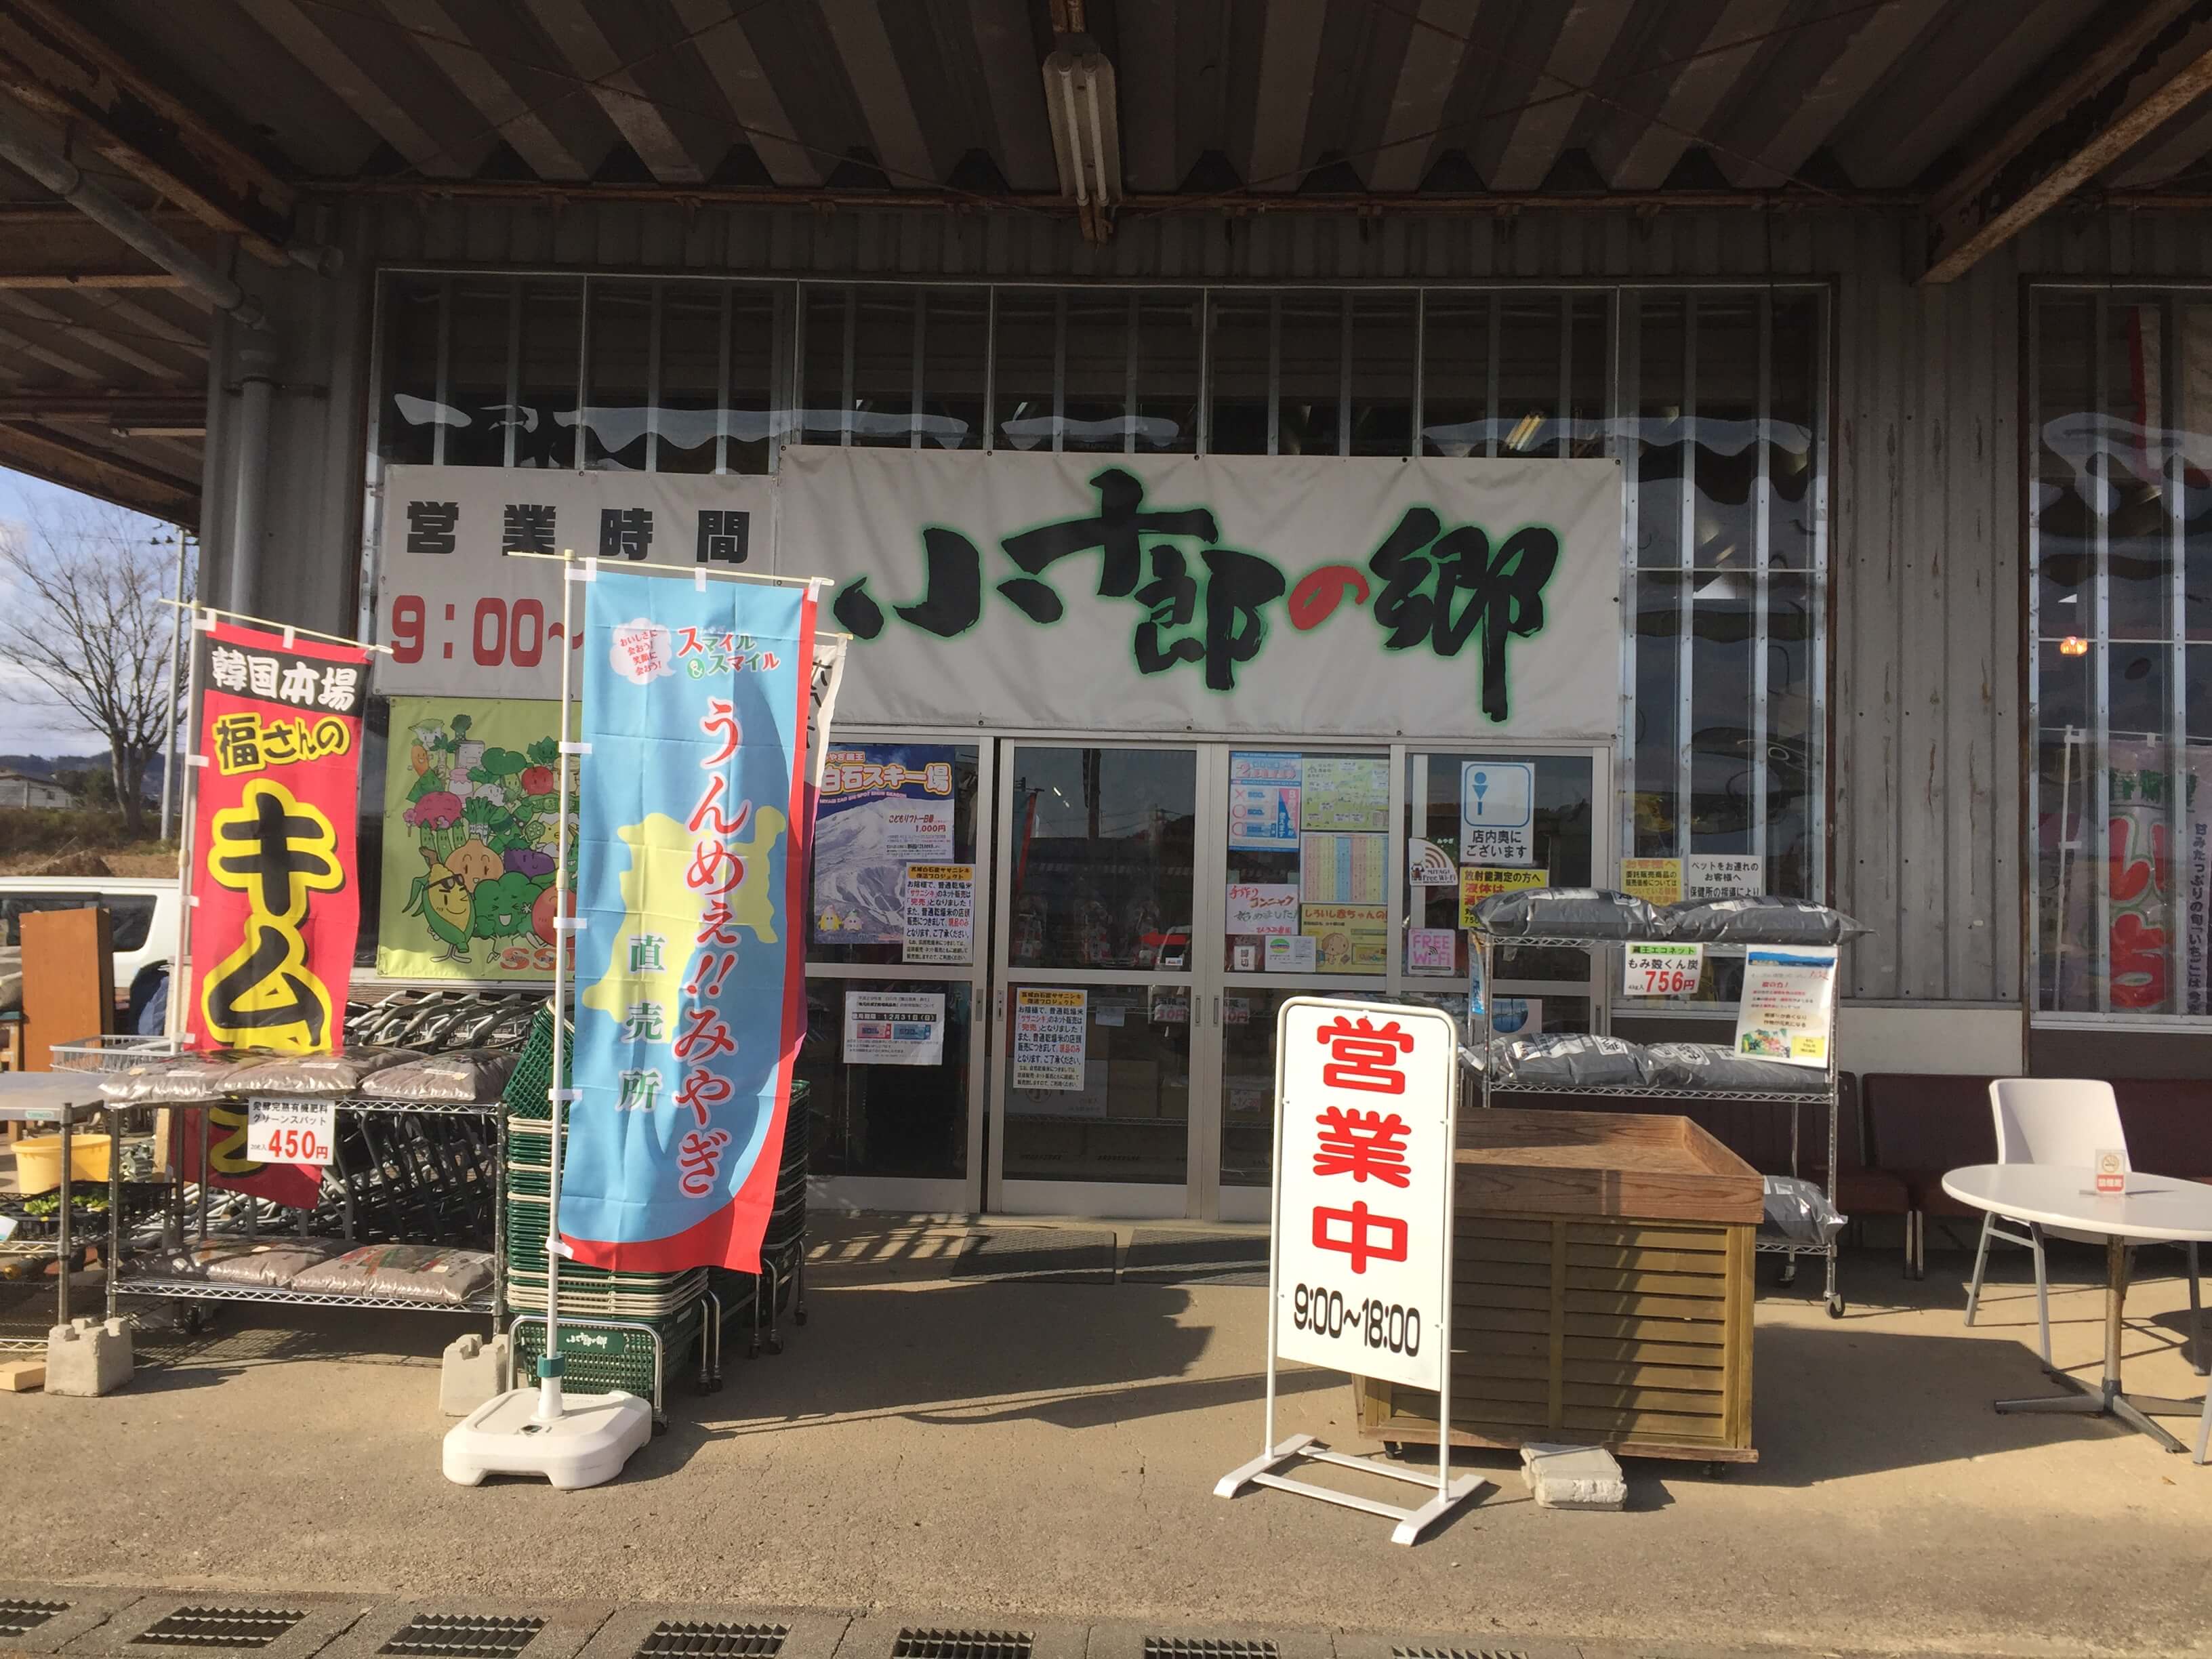 【Home of Kojurou】 Special products of Shiroishi City and Zao Town, including fresh produce, are lined up waiting for you! This is the local’s favorite, the large direct sale shop.